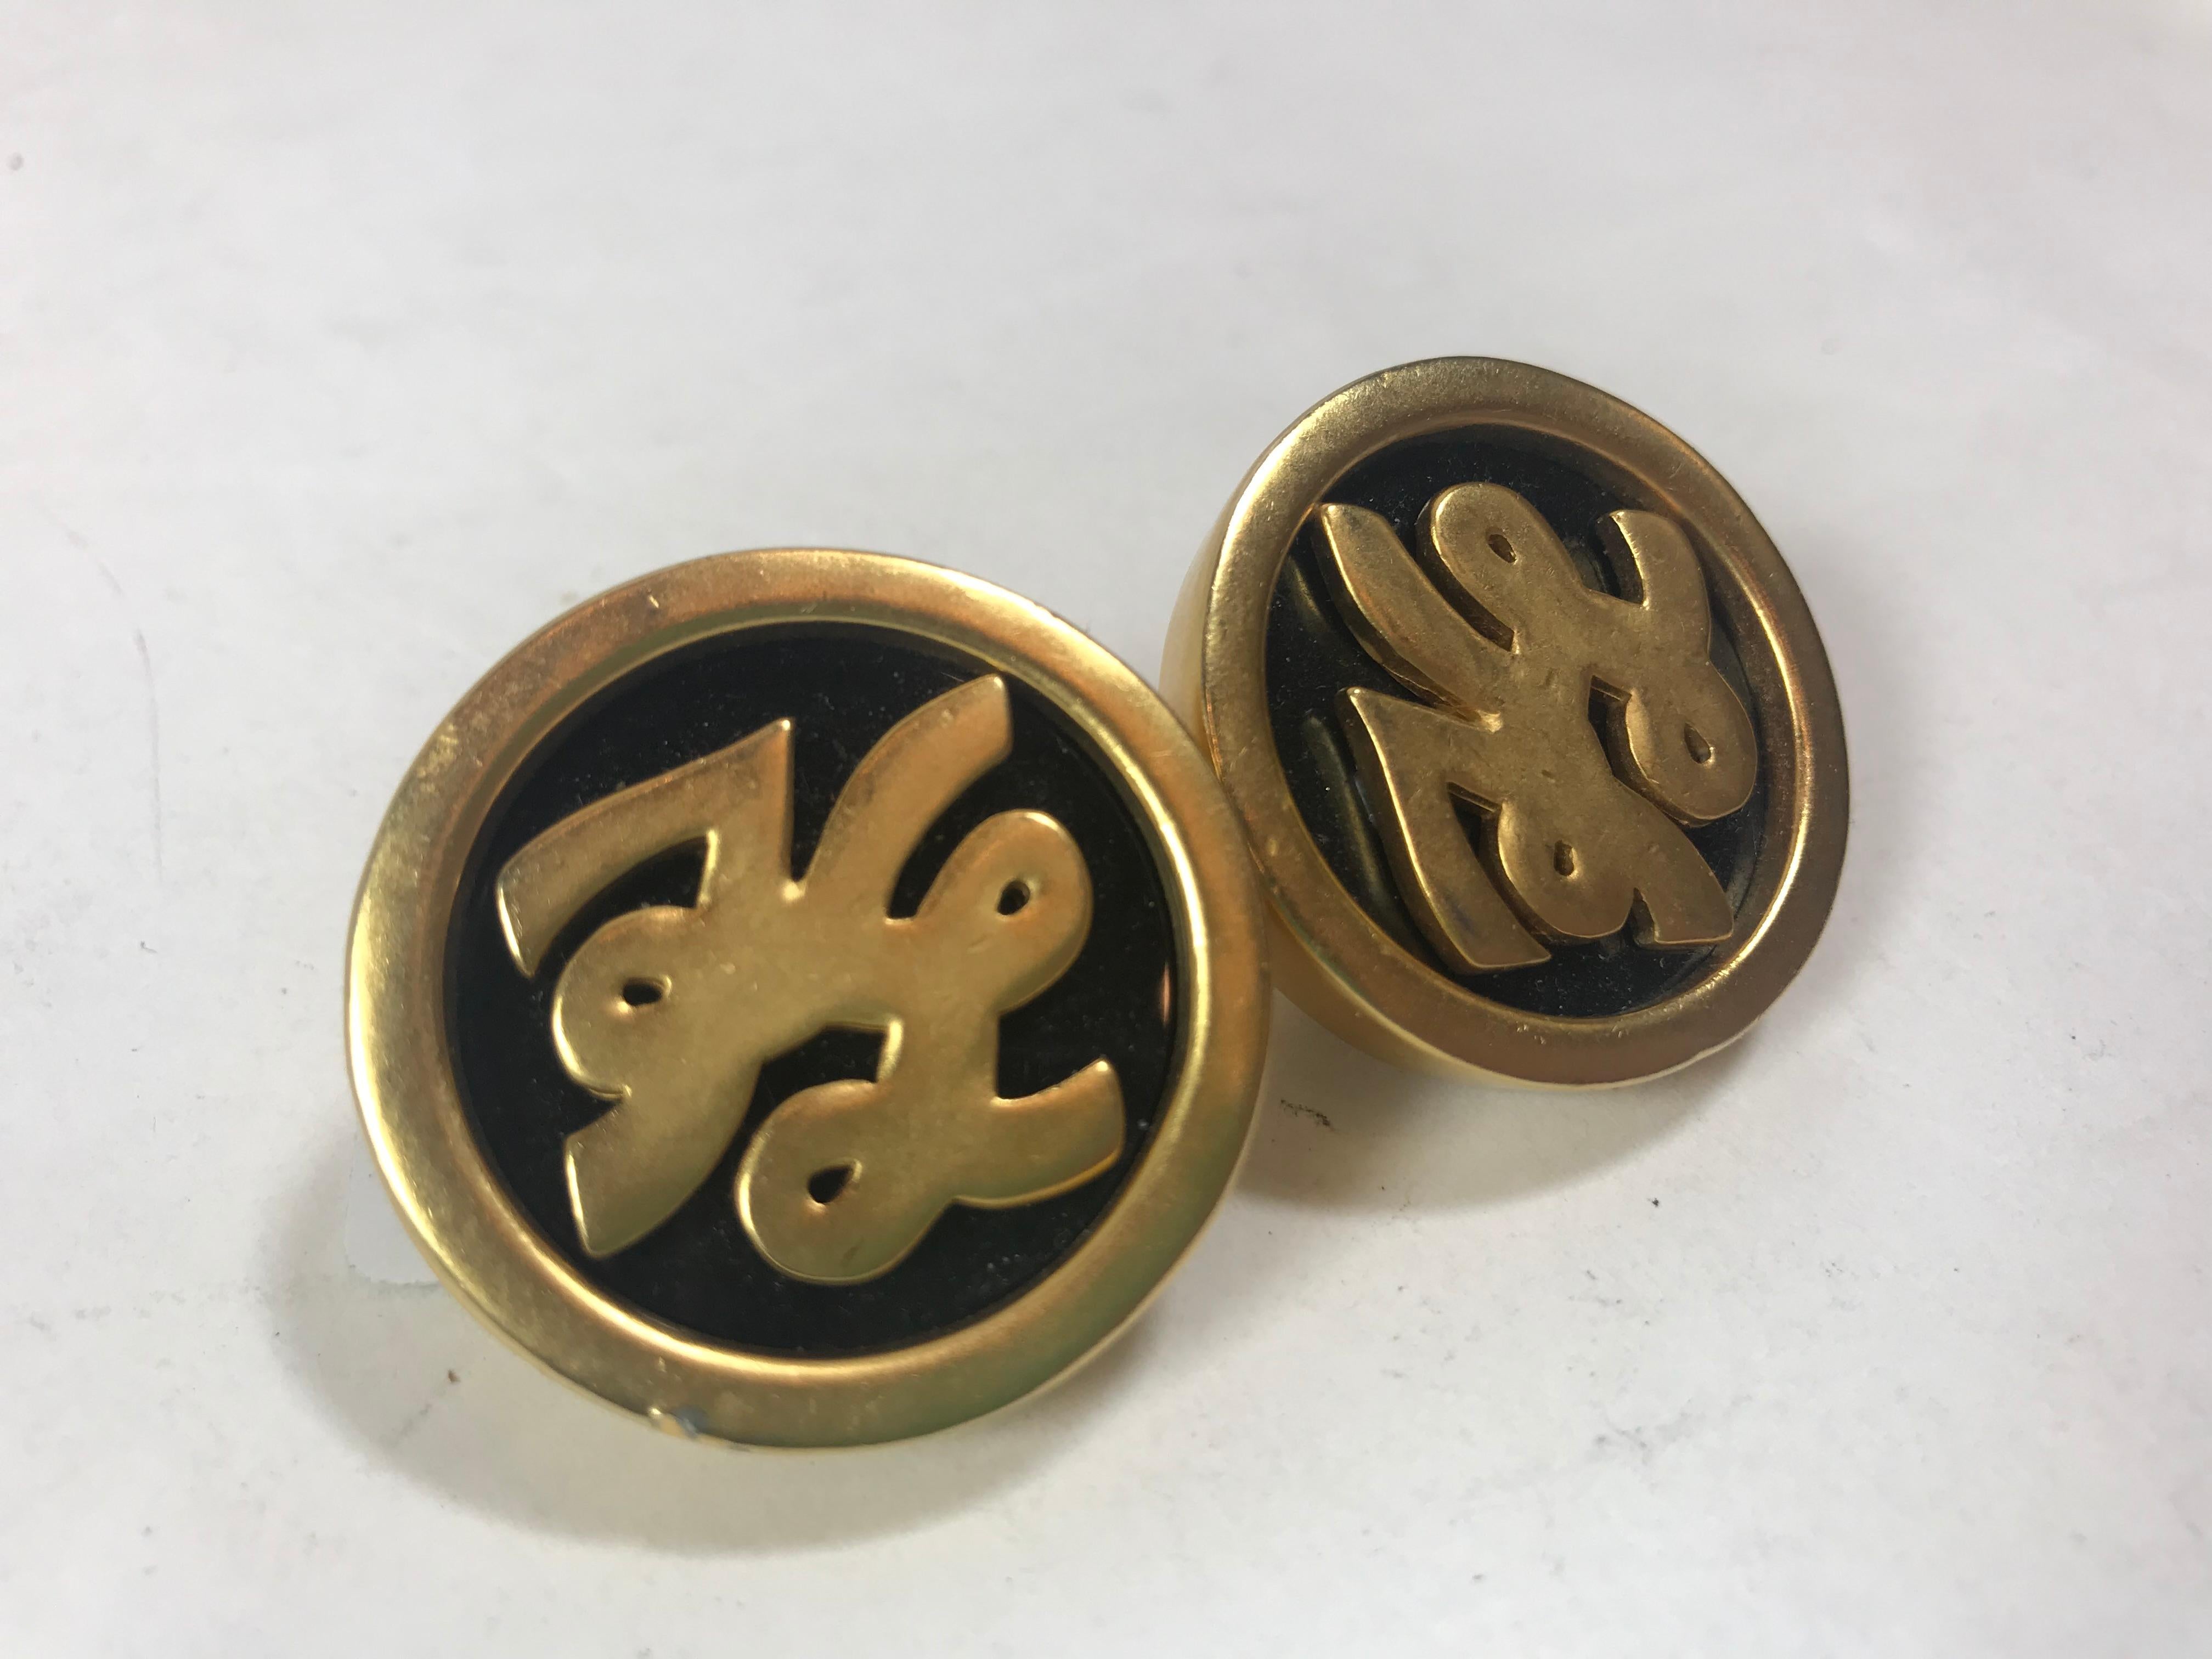 Karl Lagerfeld Vintage Oversized Monogram Clip-On Earrings In Good Condition For Sale In Roslyn, NY